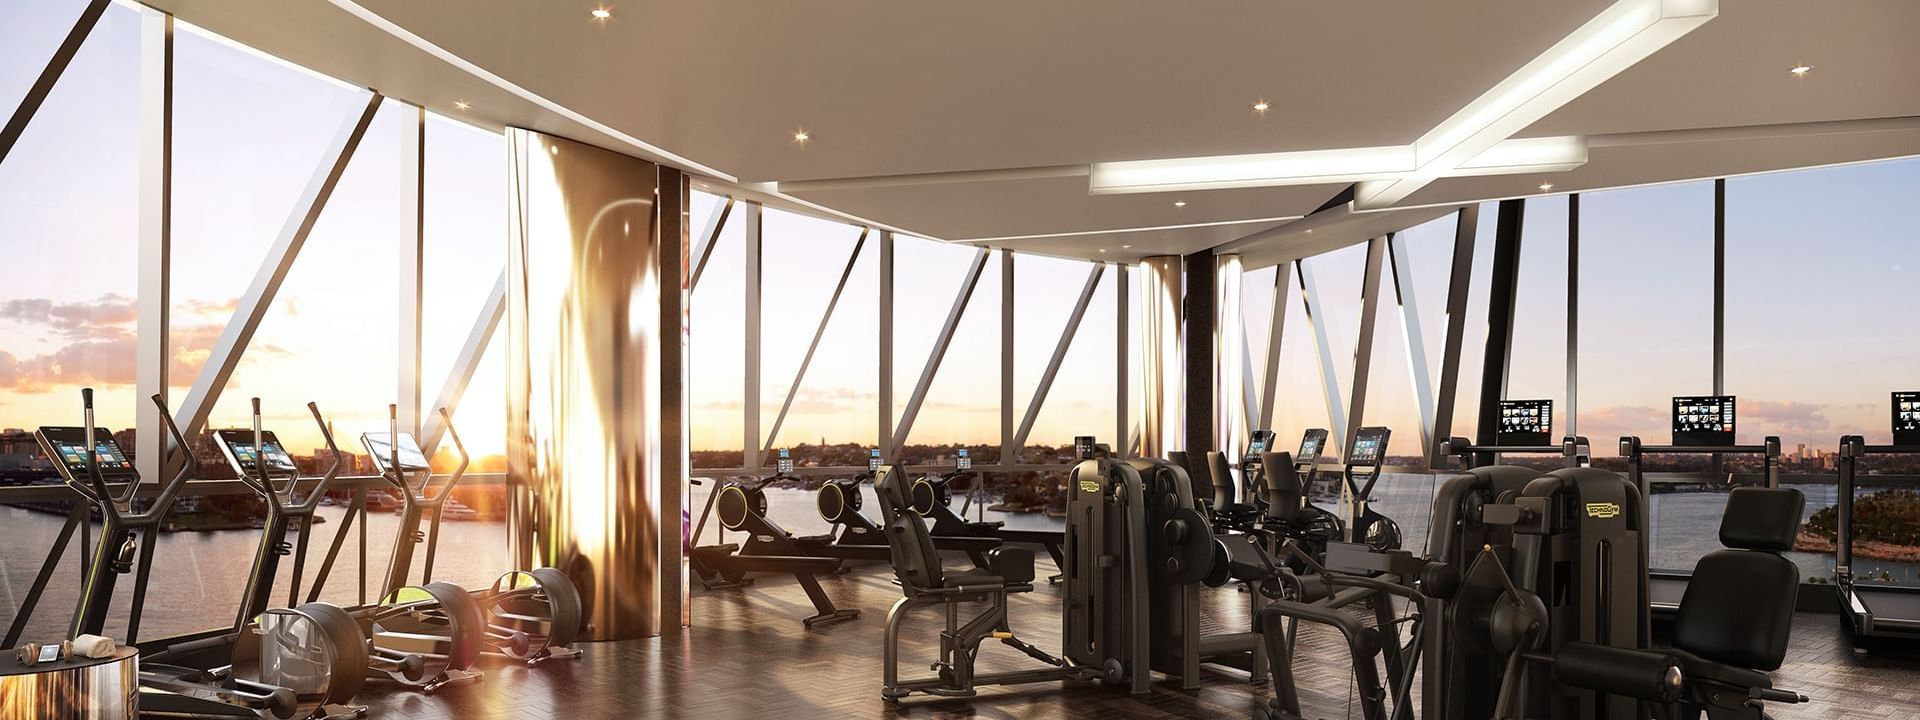 Treadmills in the fitness center at Crown Towers Sydney